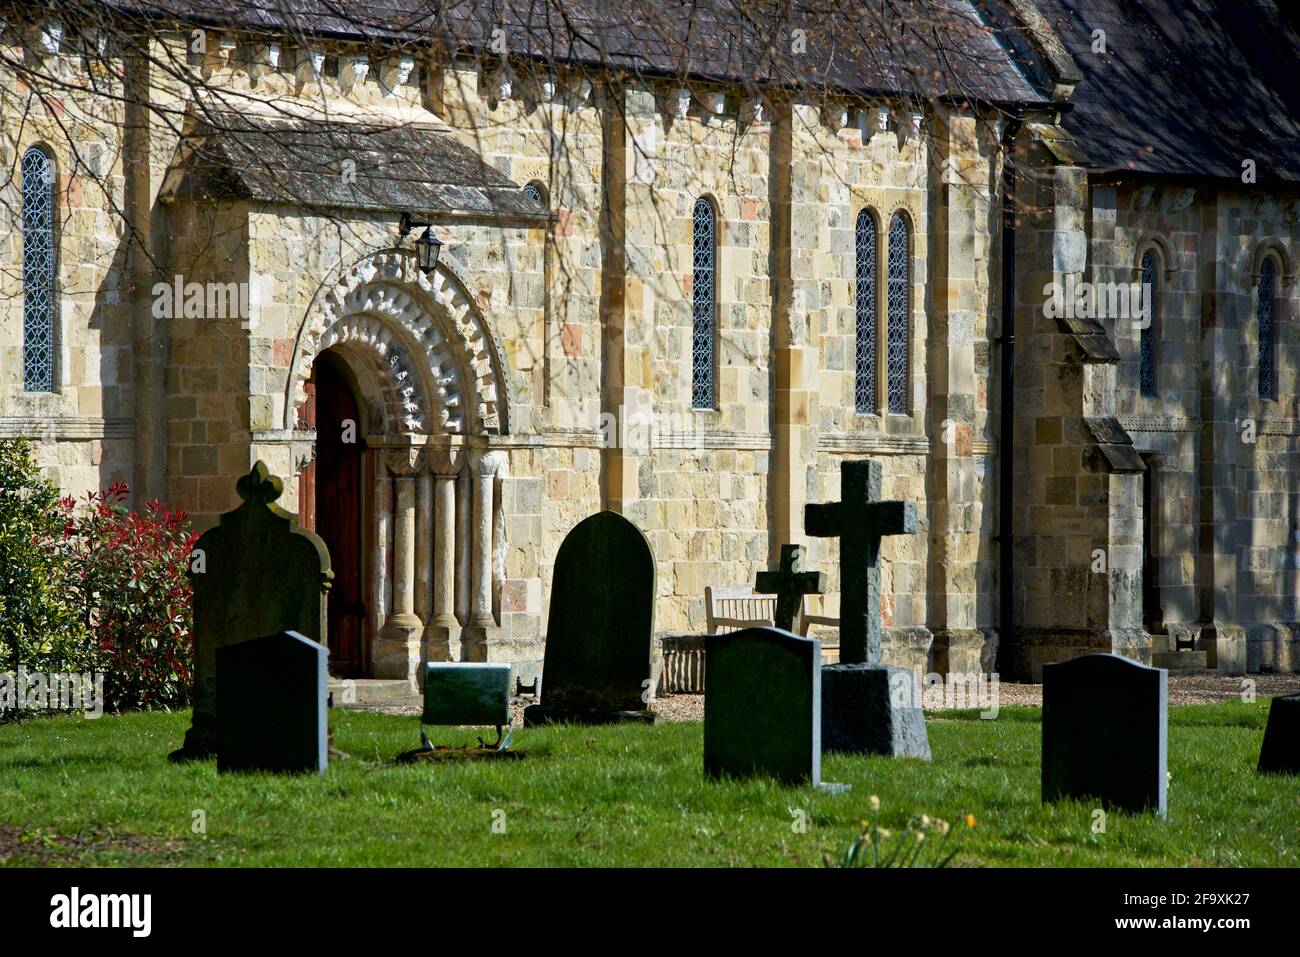 St Martin's Church in the village of Fangfoss, East Yorkshire, England UK Stock Photo